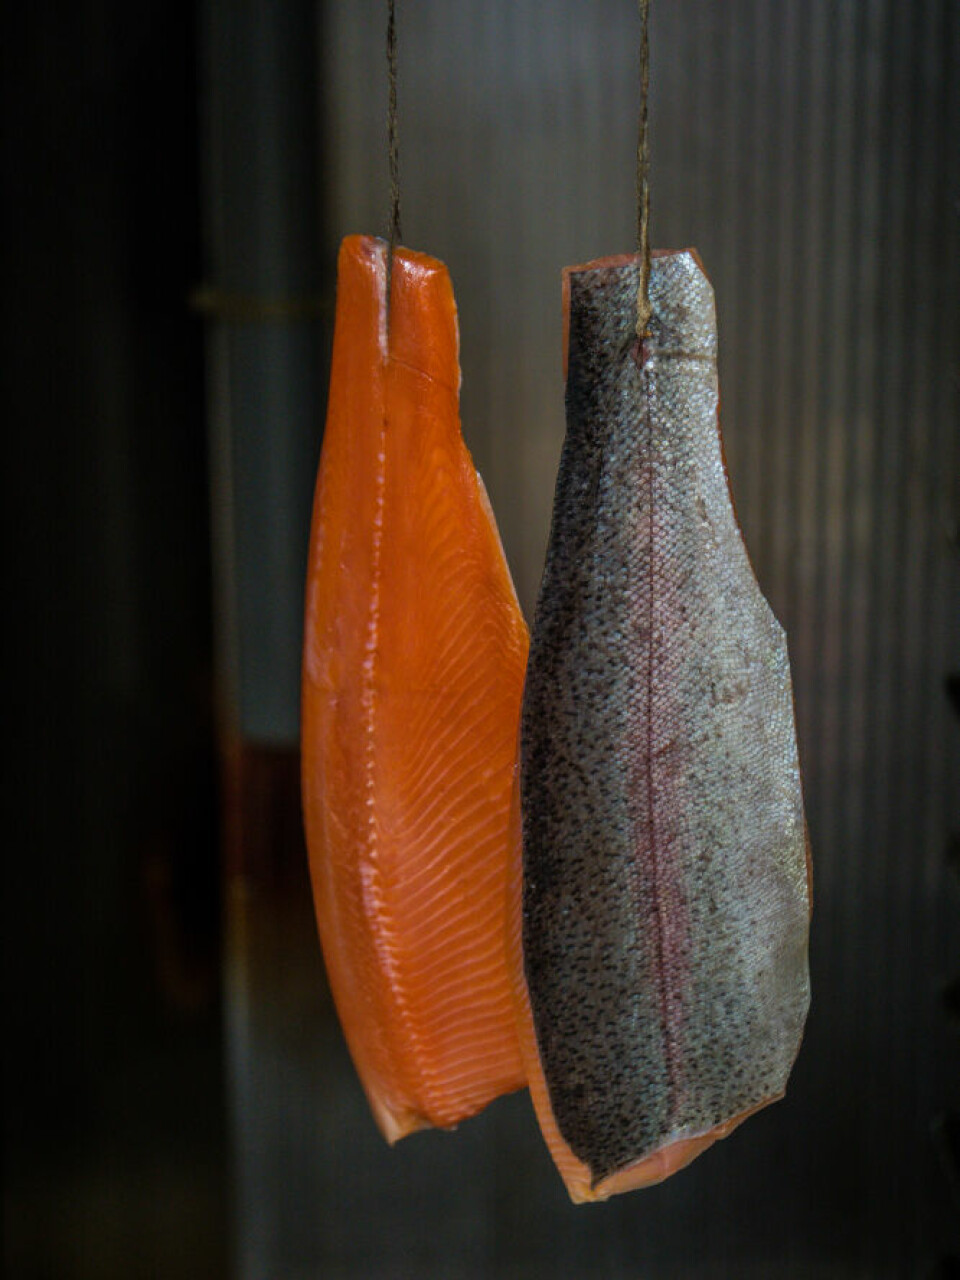 Smoked trout